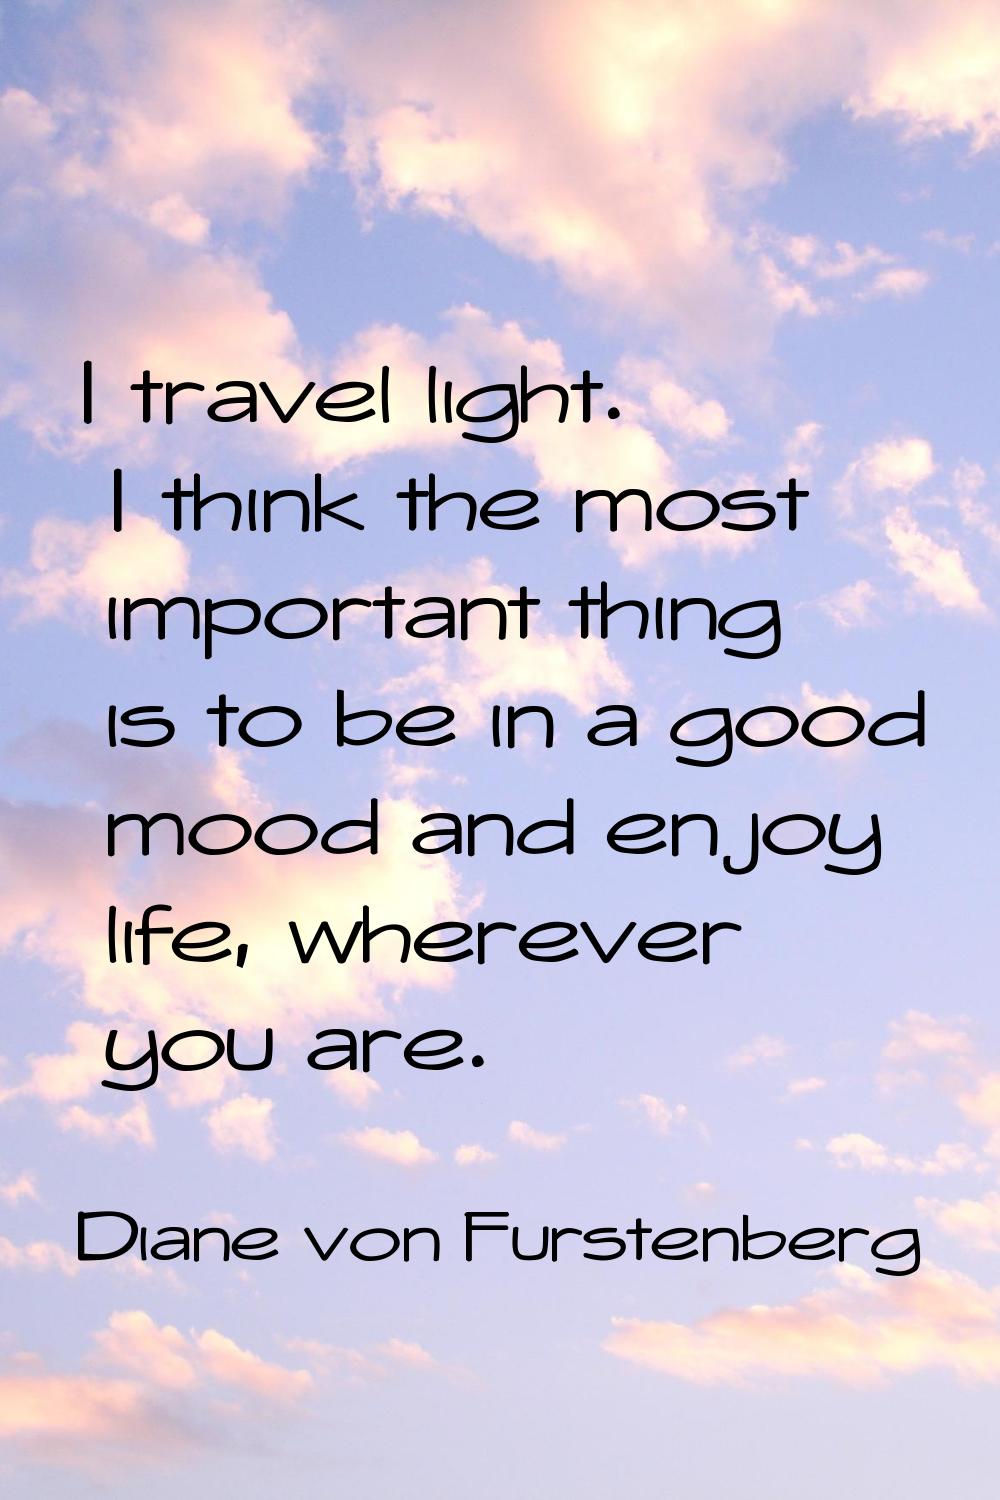 I travel light. I think the most important thing is to be in a good mood and enjoy life, wherever y